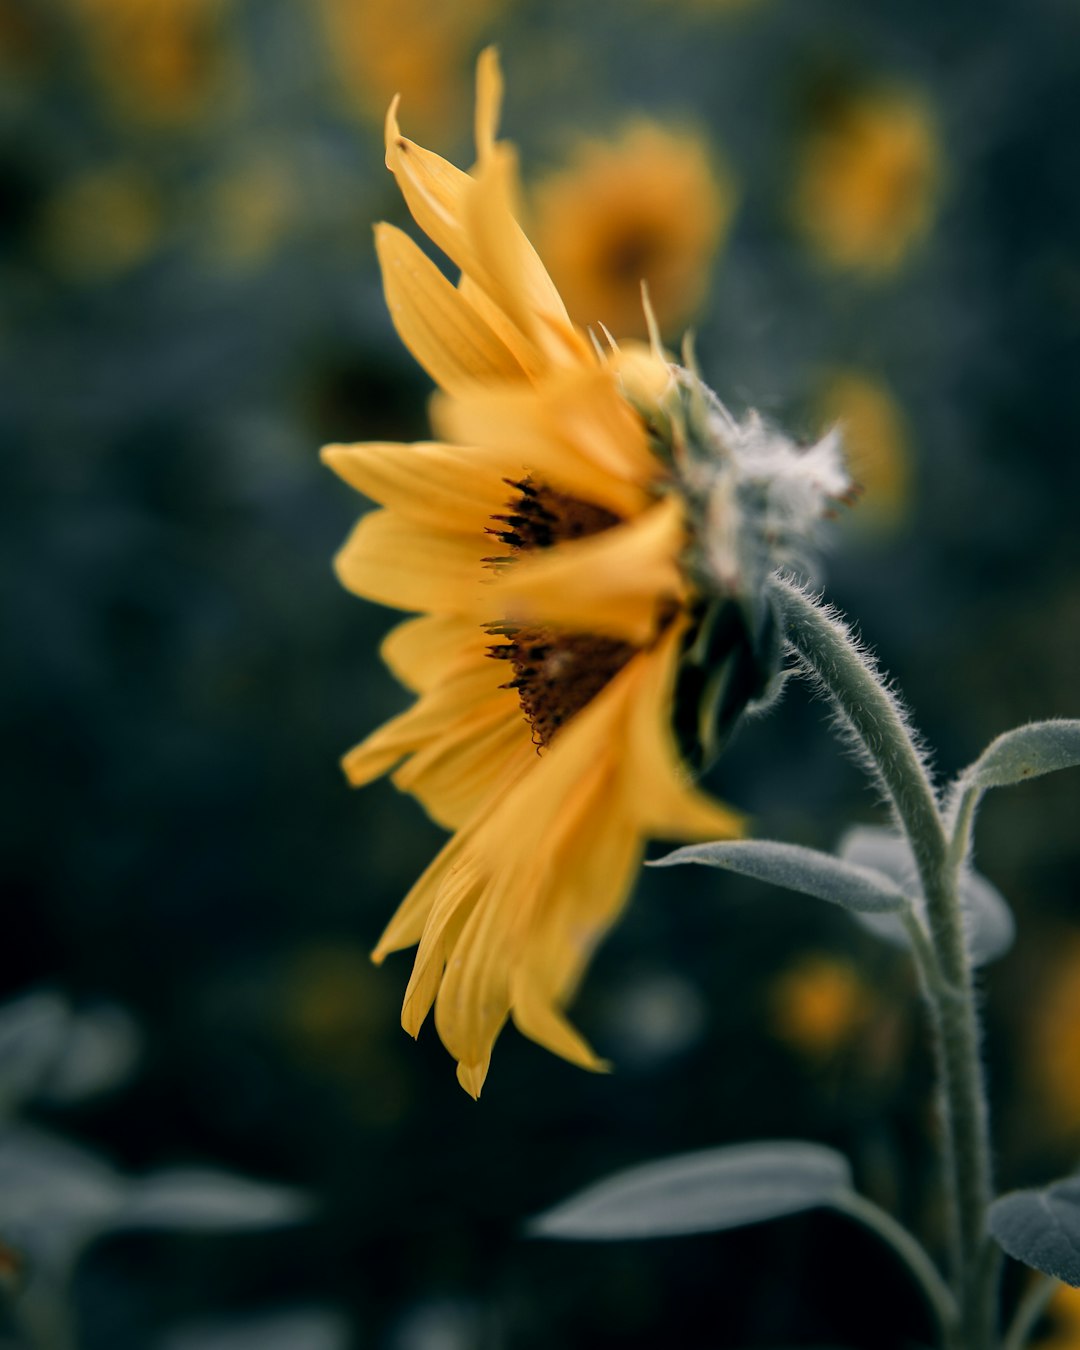 yellow sunflower plants in close-up photo